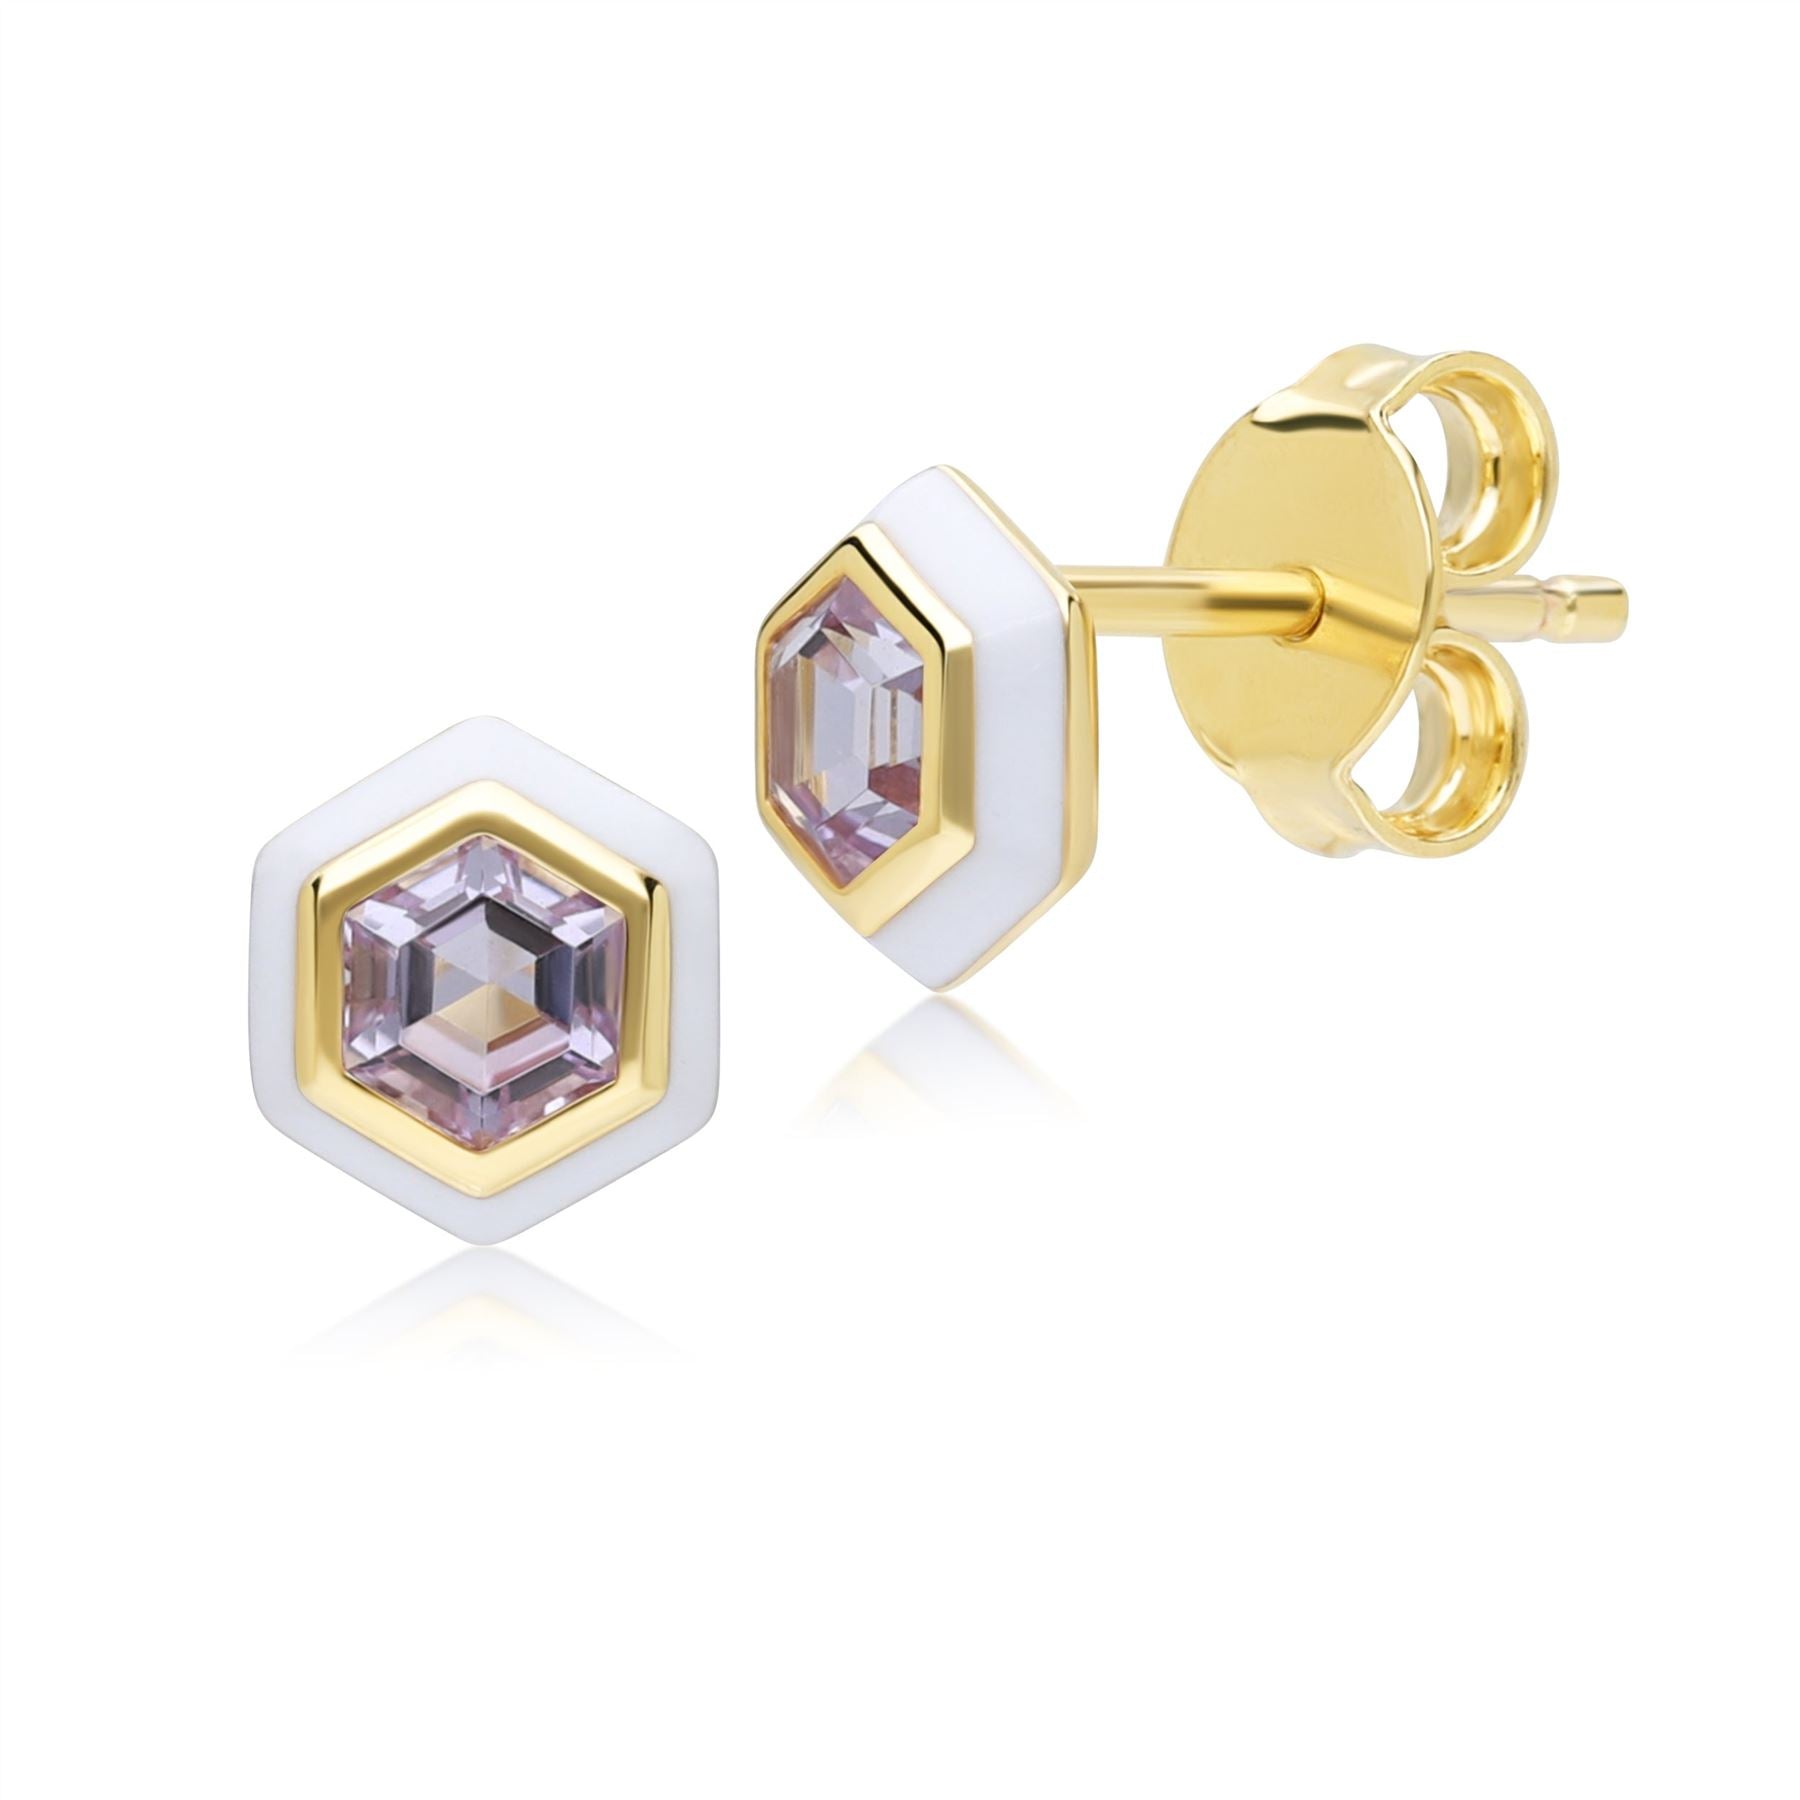 Geometric Hex Pink Amethyst and White Enamel Stud Earrings in Gold Plated Sterling Silver Front